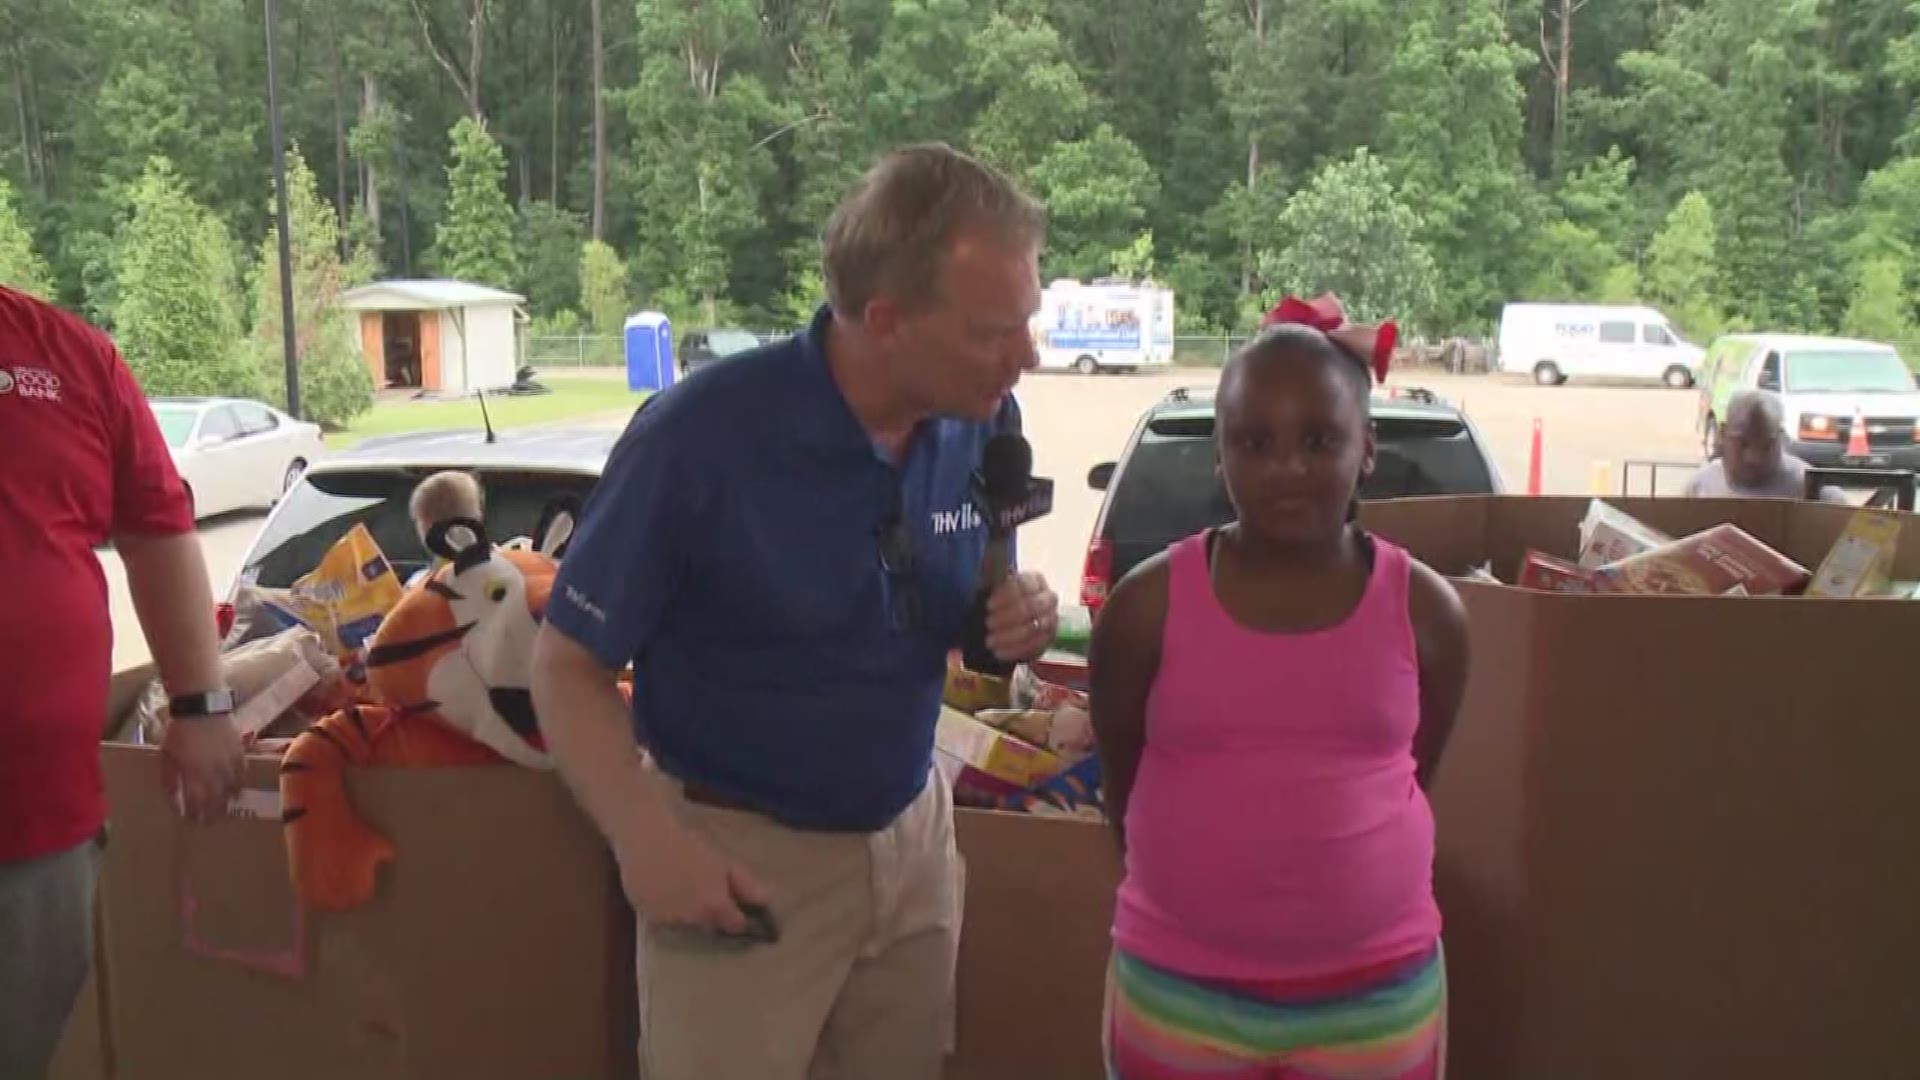 Tom Brannon was live from the Arkansas Foodbank warehouse to wrap up the last day of the THV11 Summer Cereal Drive